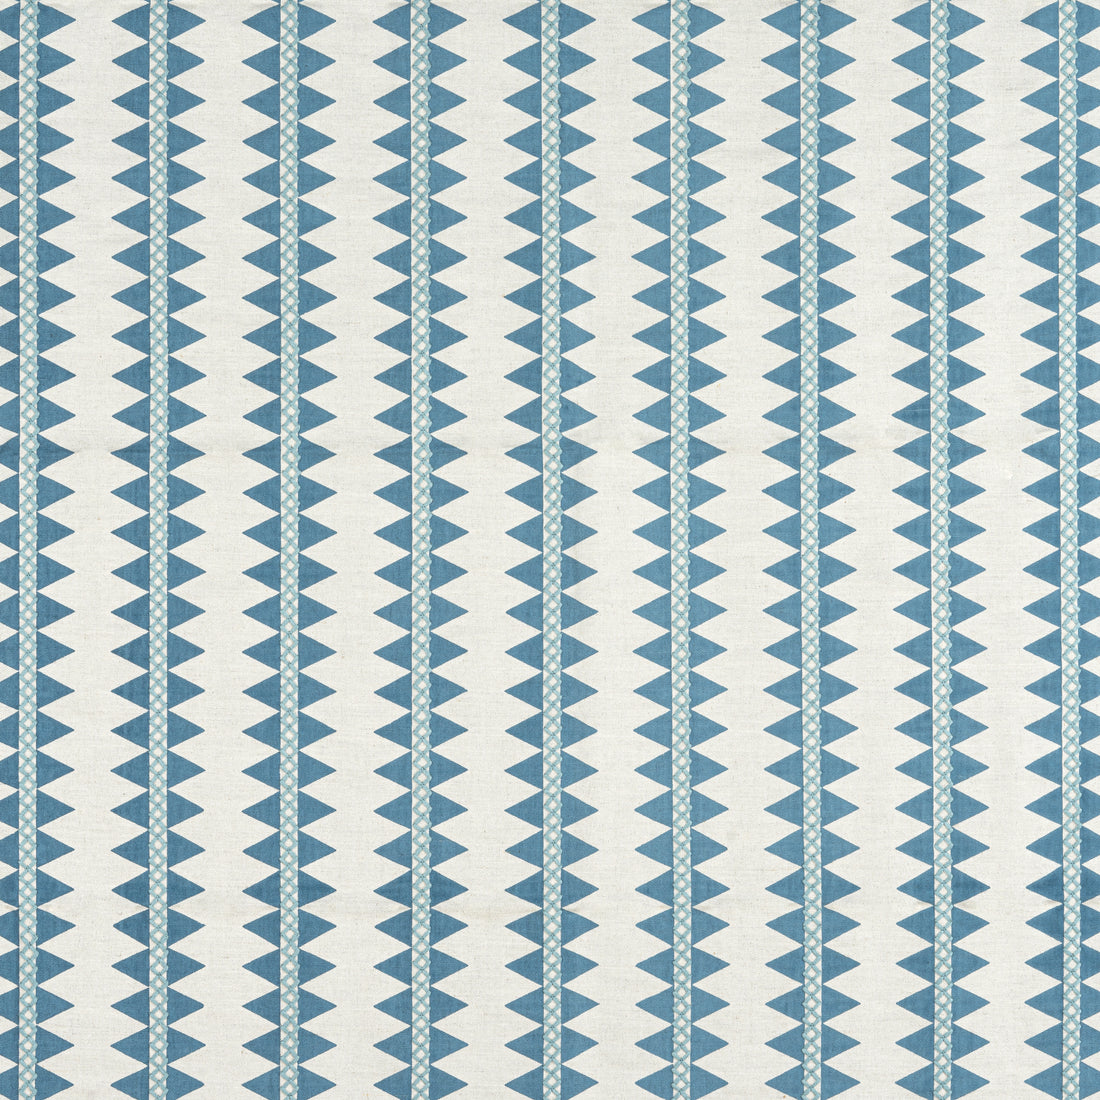 Reno Stripe Embroidery fabric in teal color - pattern number W713243 - by Thibaut in the Mesa Fabrics collection